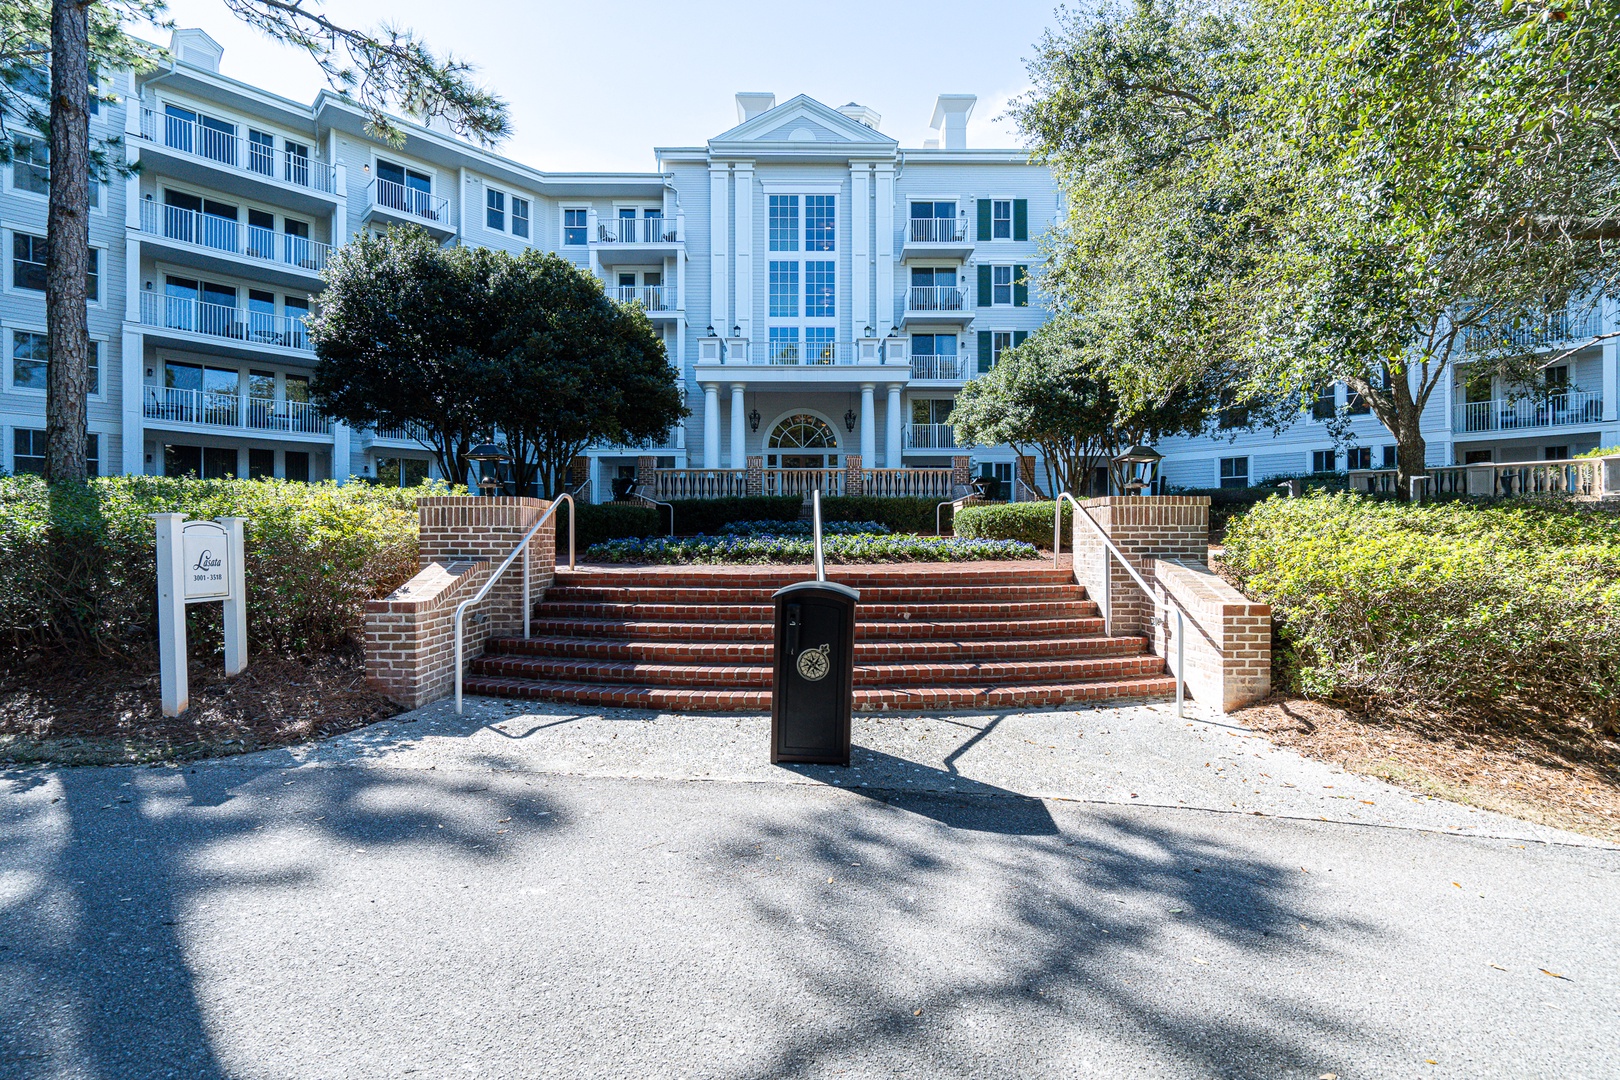 Enjoy your stay at the Grand Sandestin!